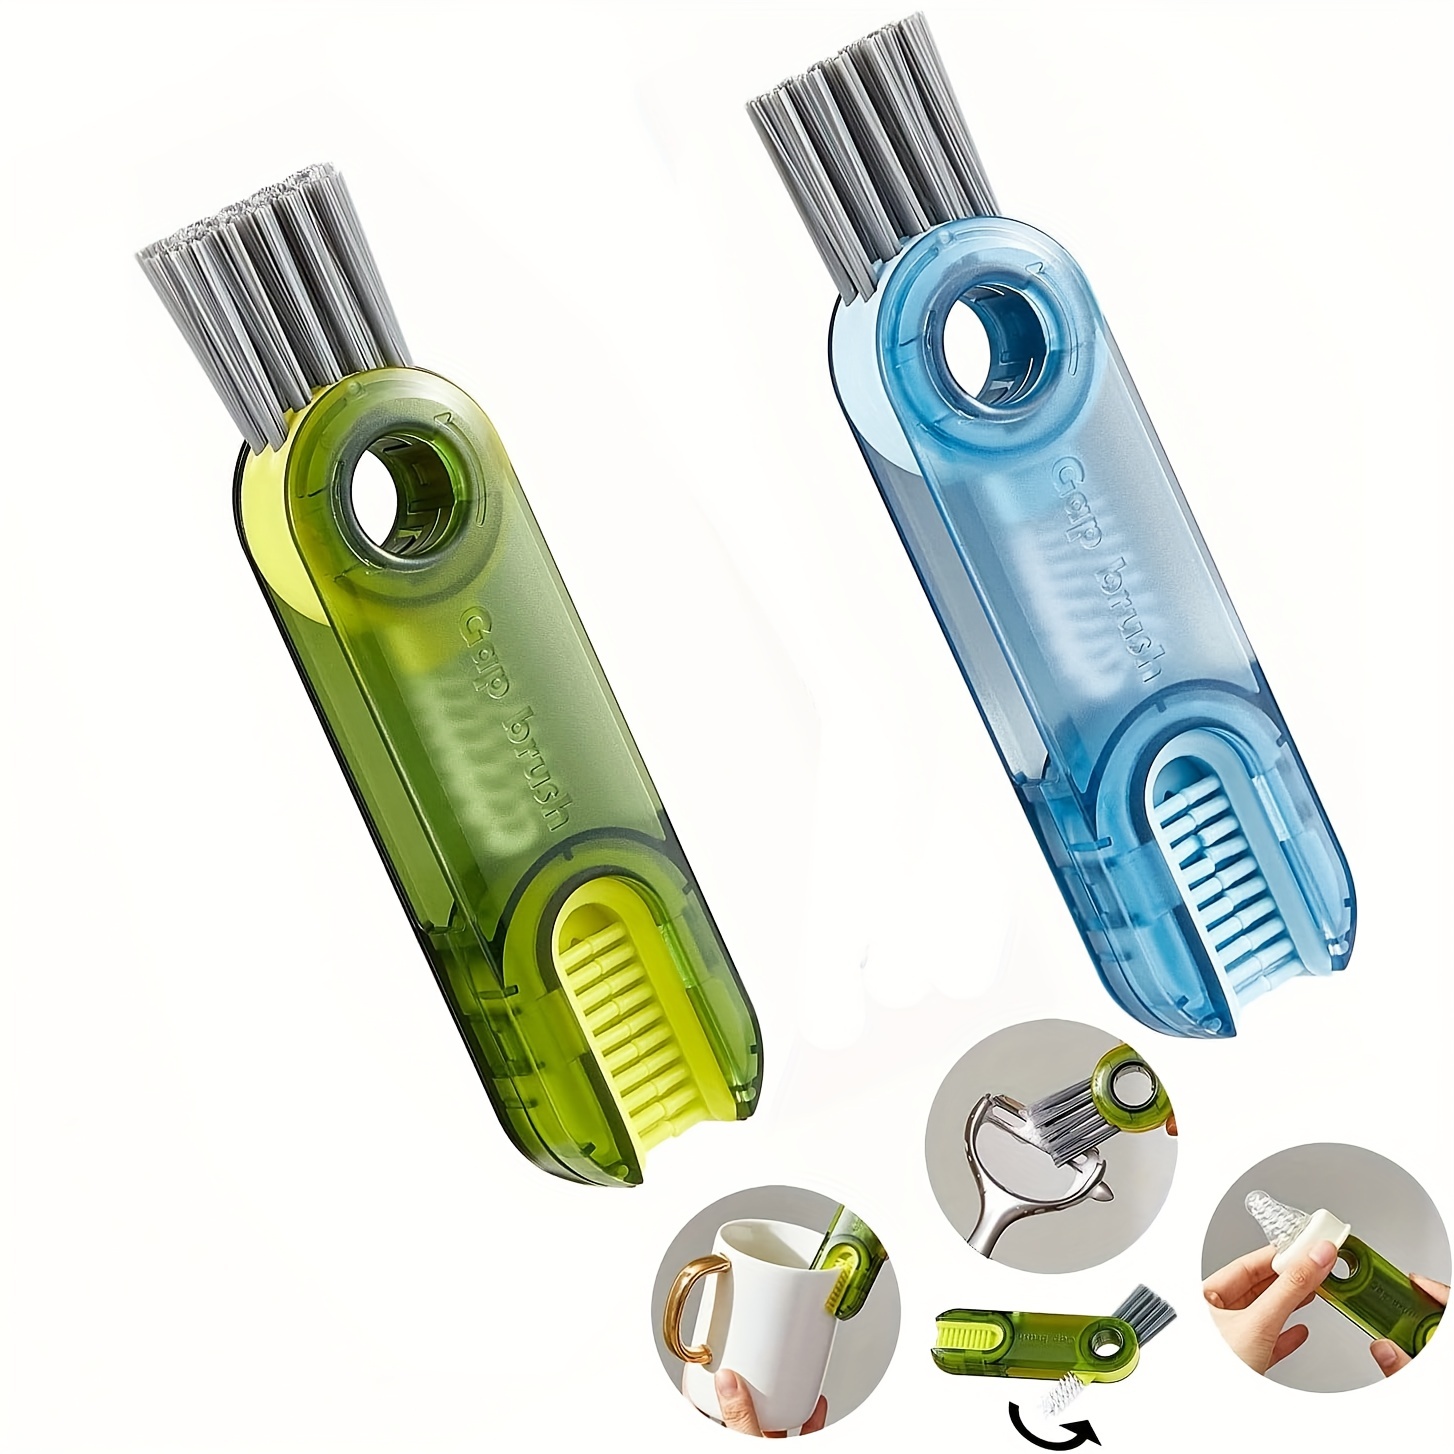 3 in 1 Multifunctional Cleaning Brush,Multi-Functional Insulation Cup  Crevice Cleaning Tools,Multipurpose Bottle Gap Cleaner Brush,3 in 1Cup Lid